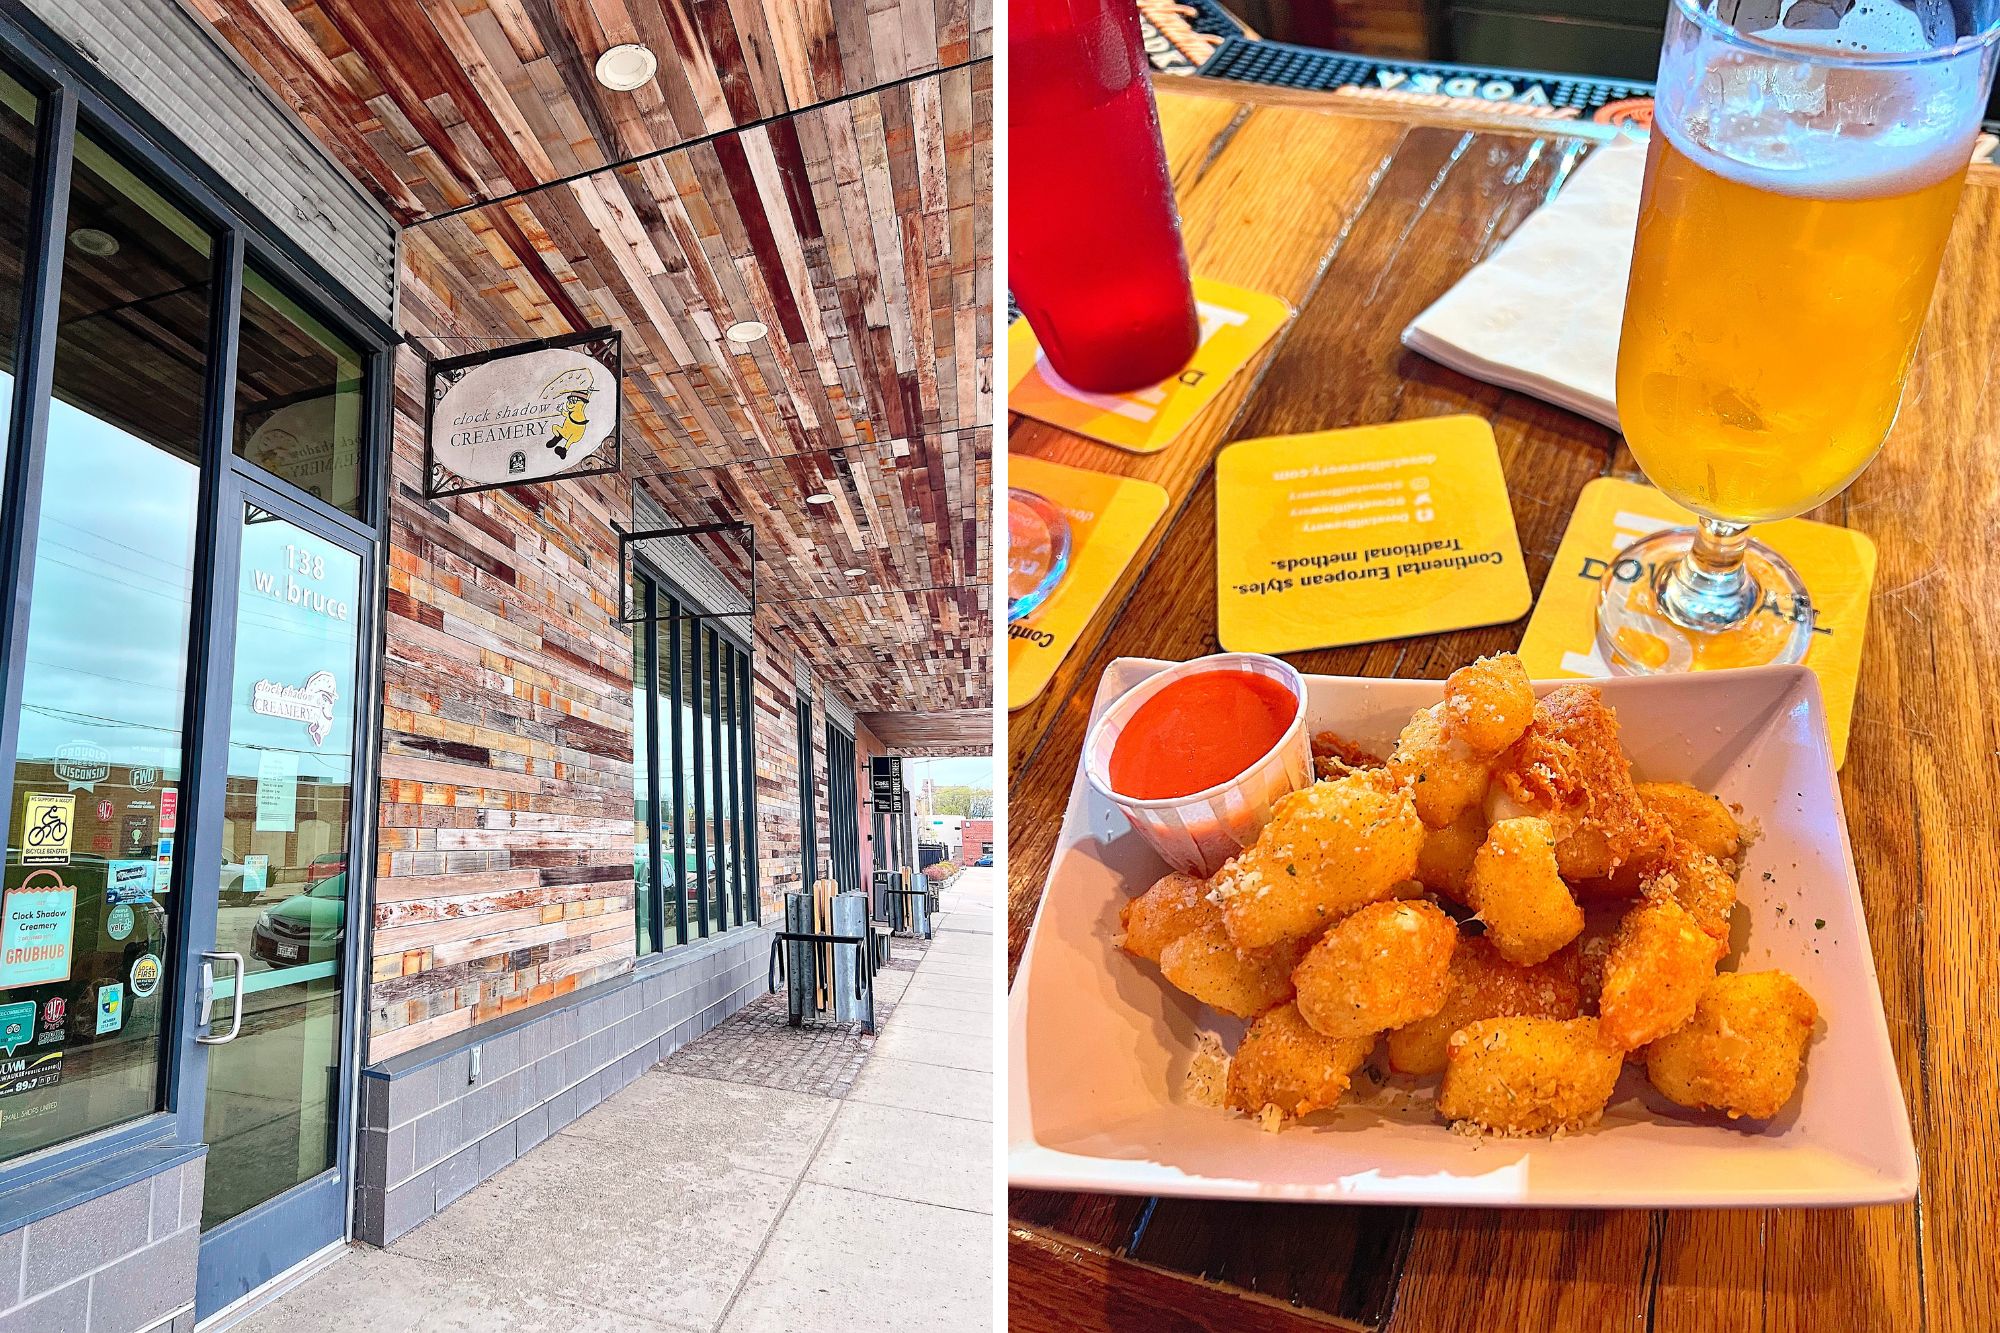 Two photos: a photo of the entrance to Clock Shadow Creamery, and an order of cheese curds from Camino